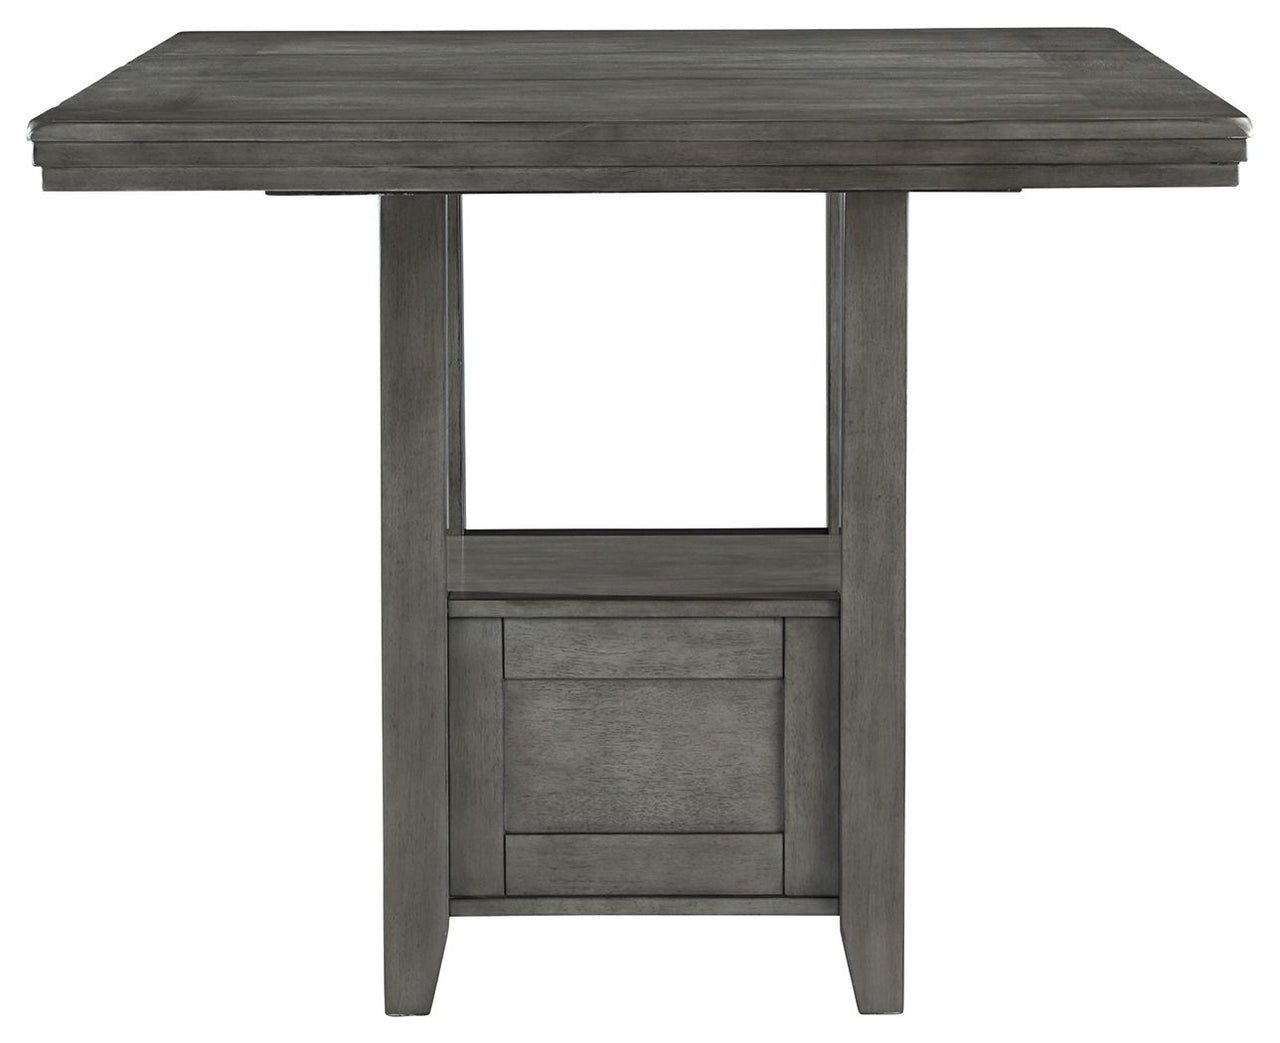 Hallanden - Gray - Rectangular Dining Room Counter Extension Table - Tony's Home Furnishings